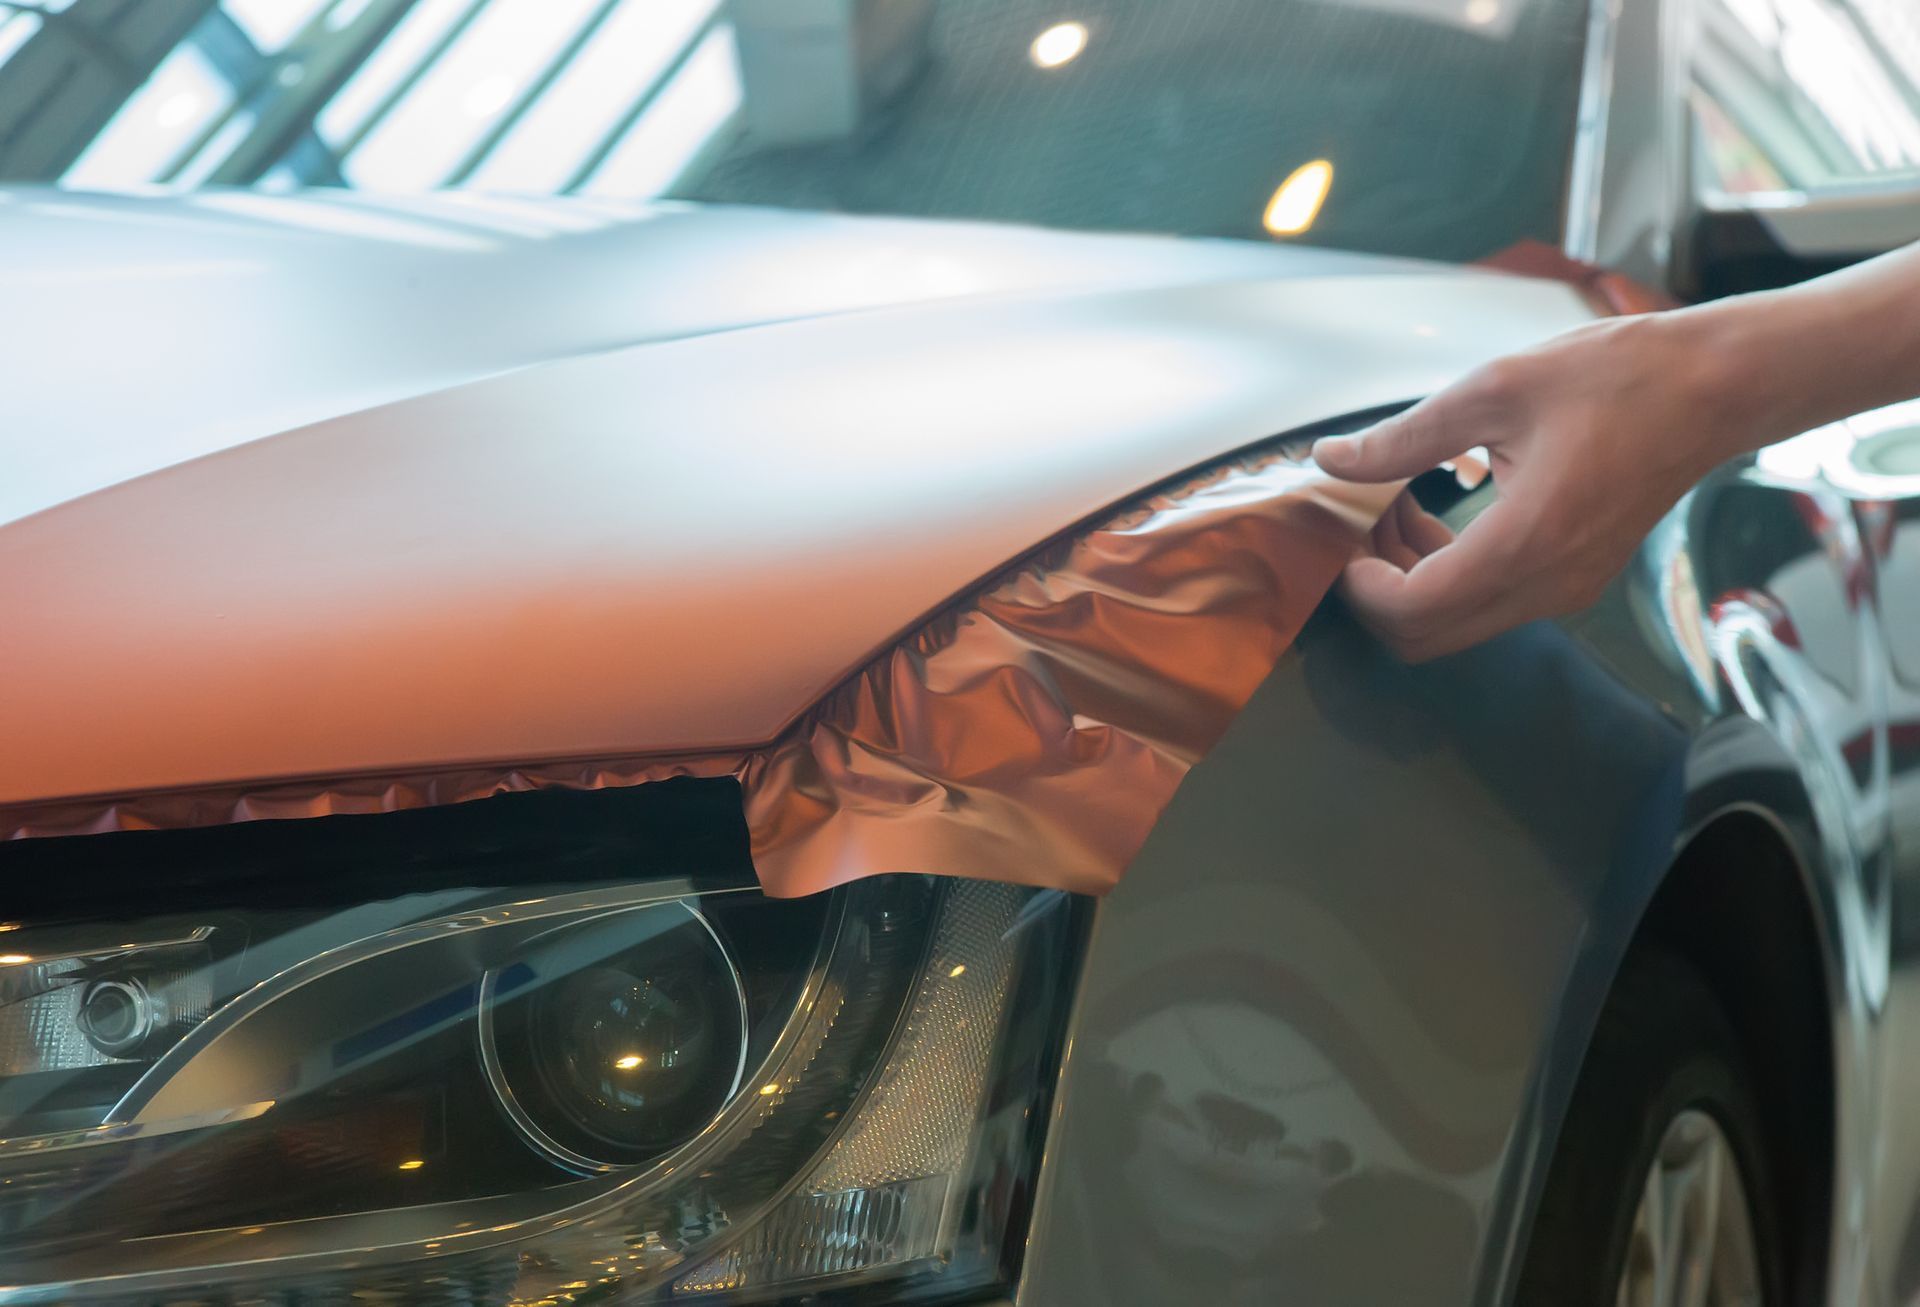 Painting Vs. Wrapping Your Vehicle - Which Is Better? | Vegas Auto Repair & Service